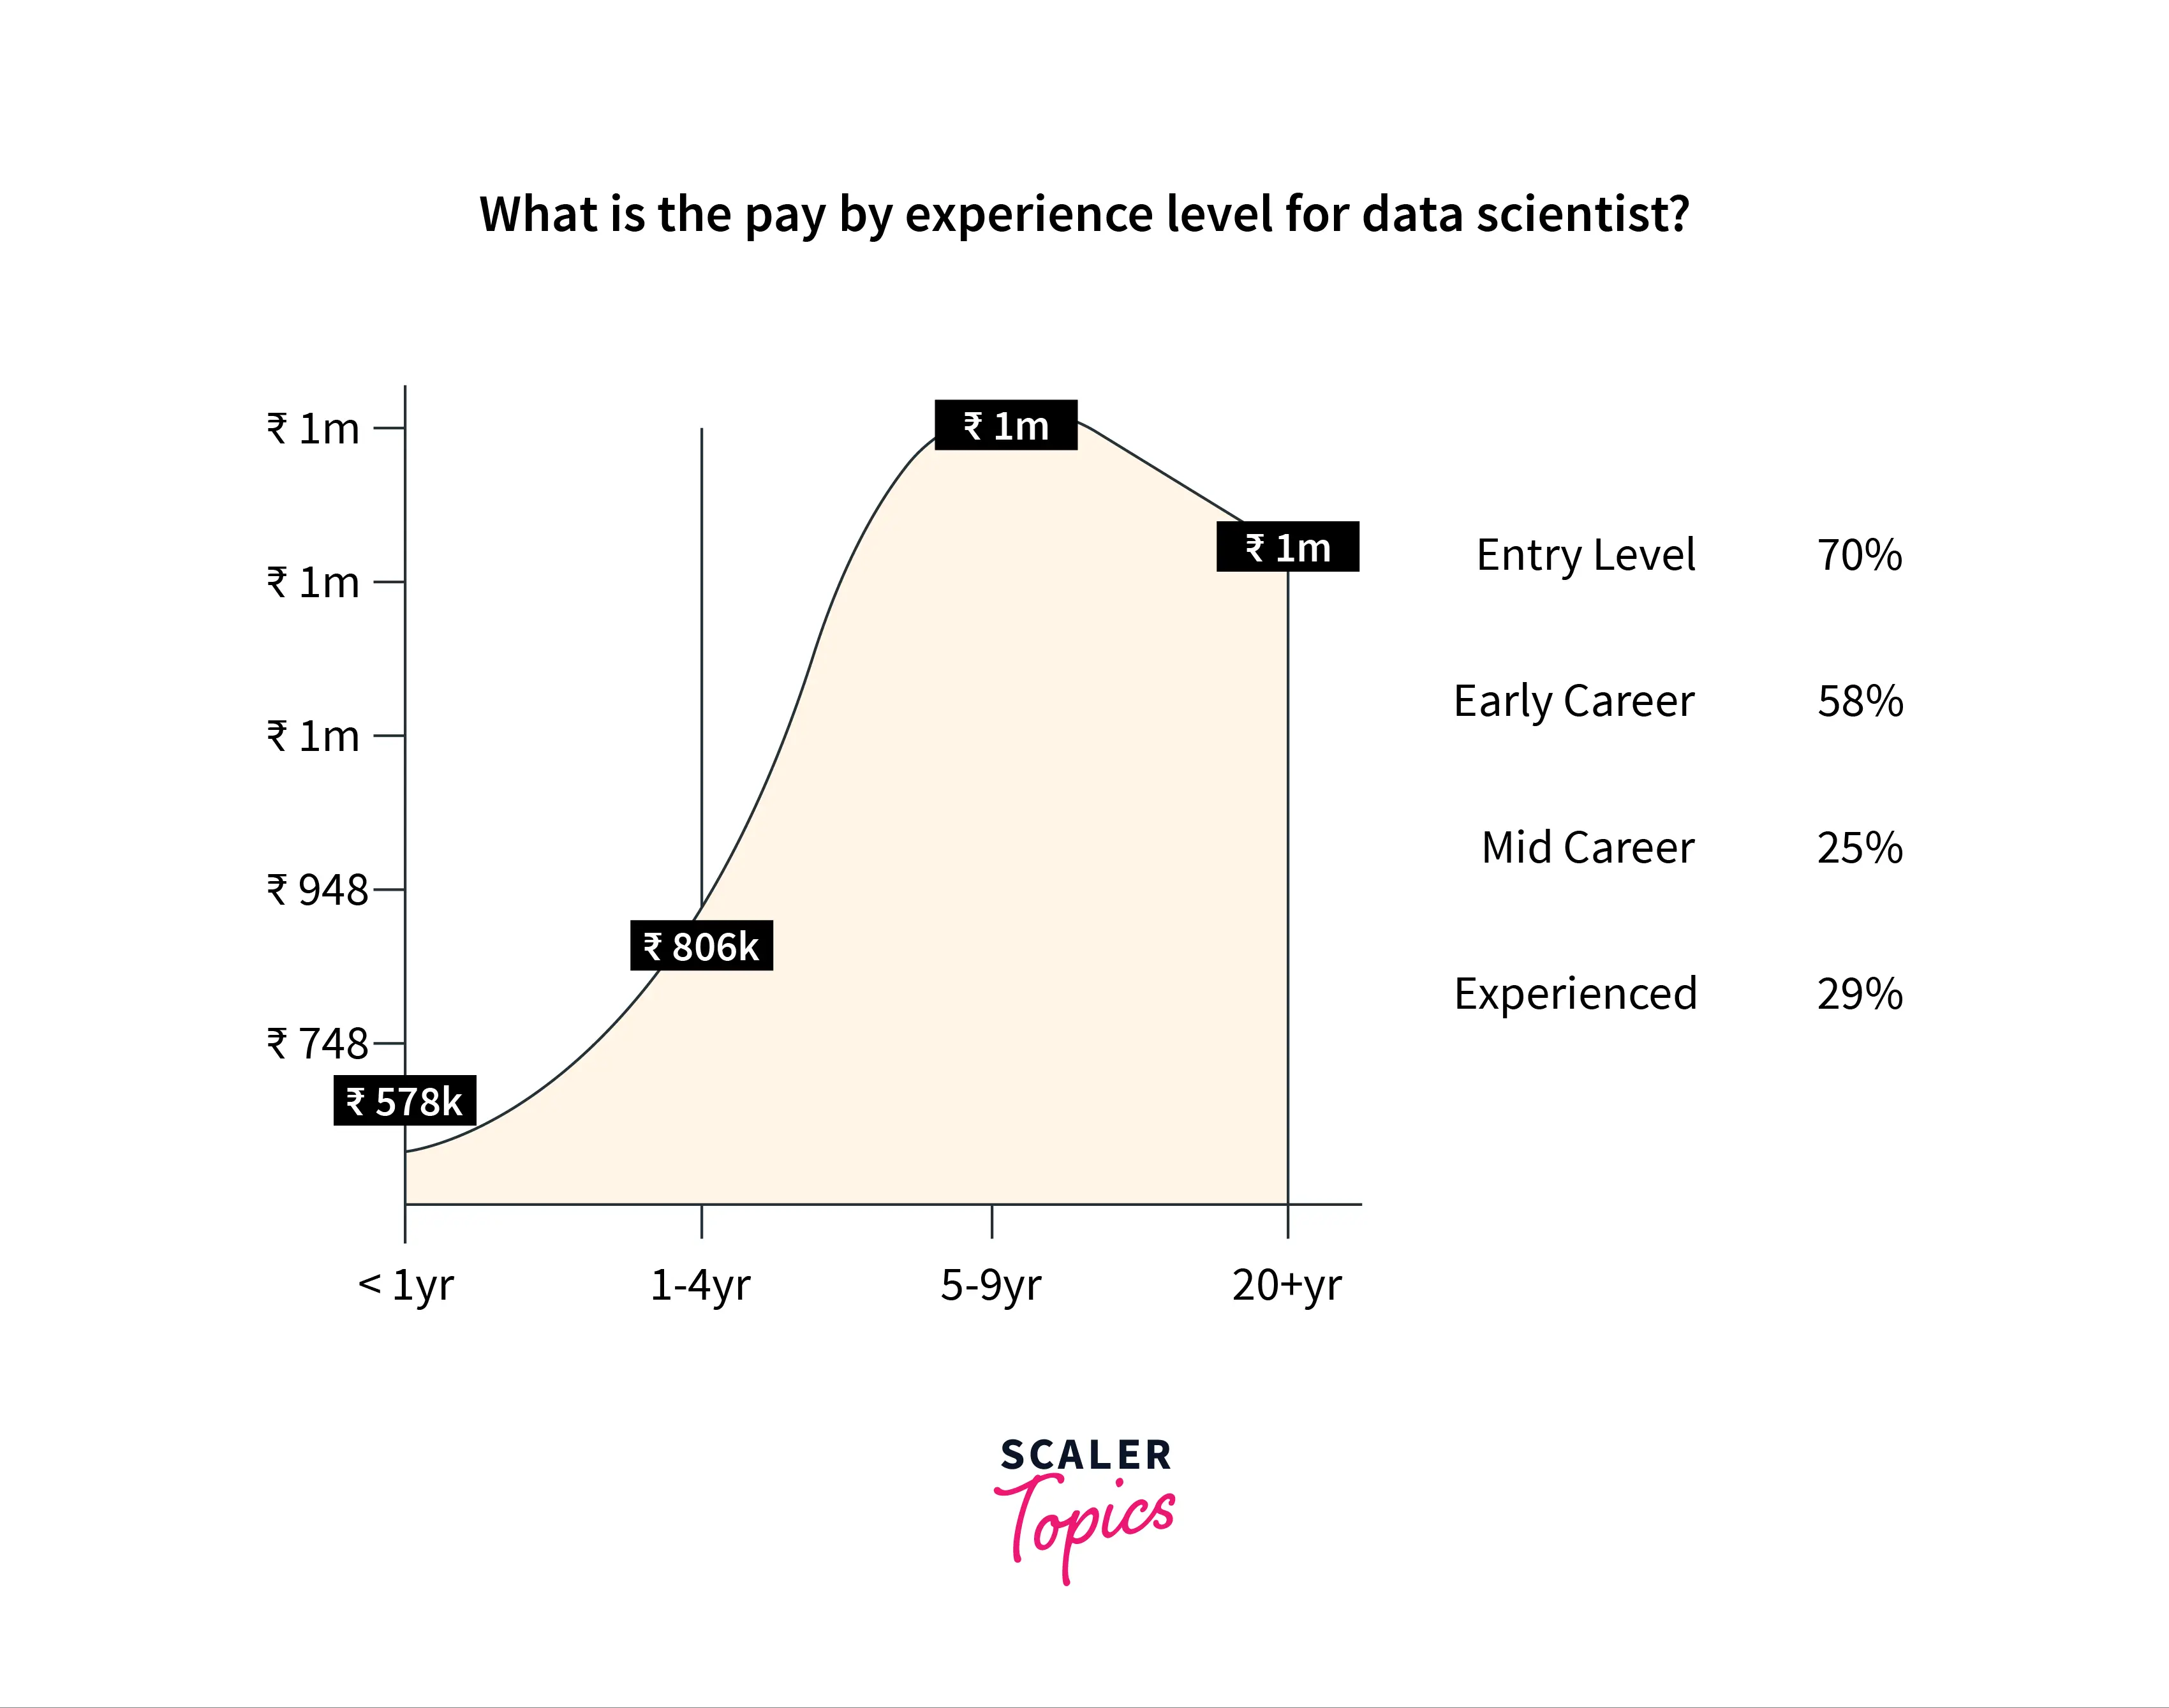 Data Scientist Salary For Late-Career Data Scientists